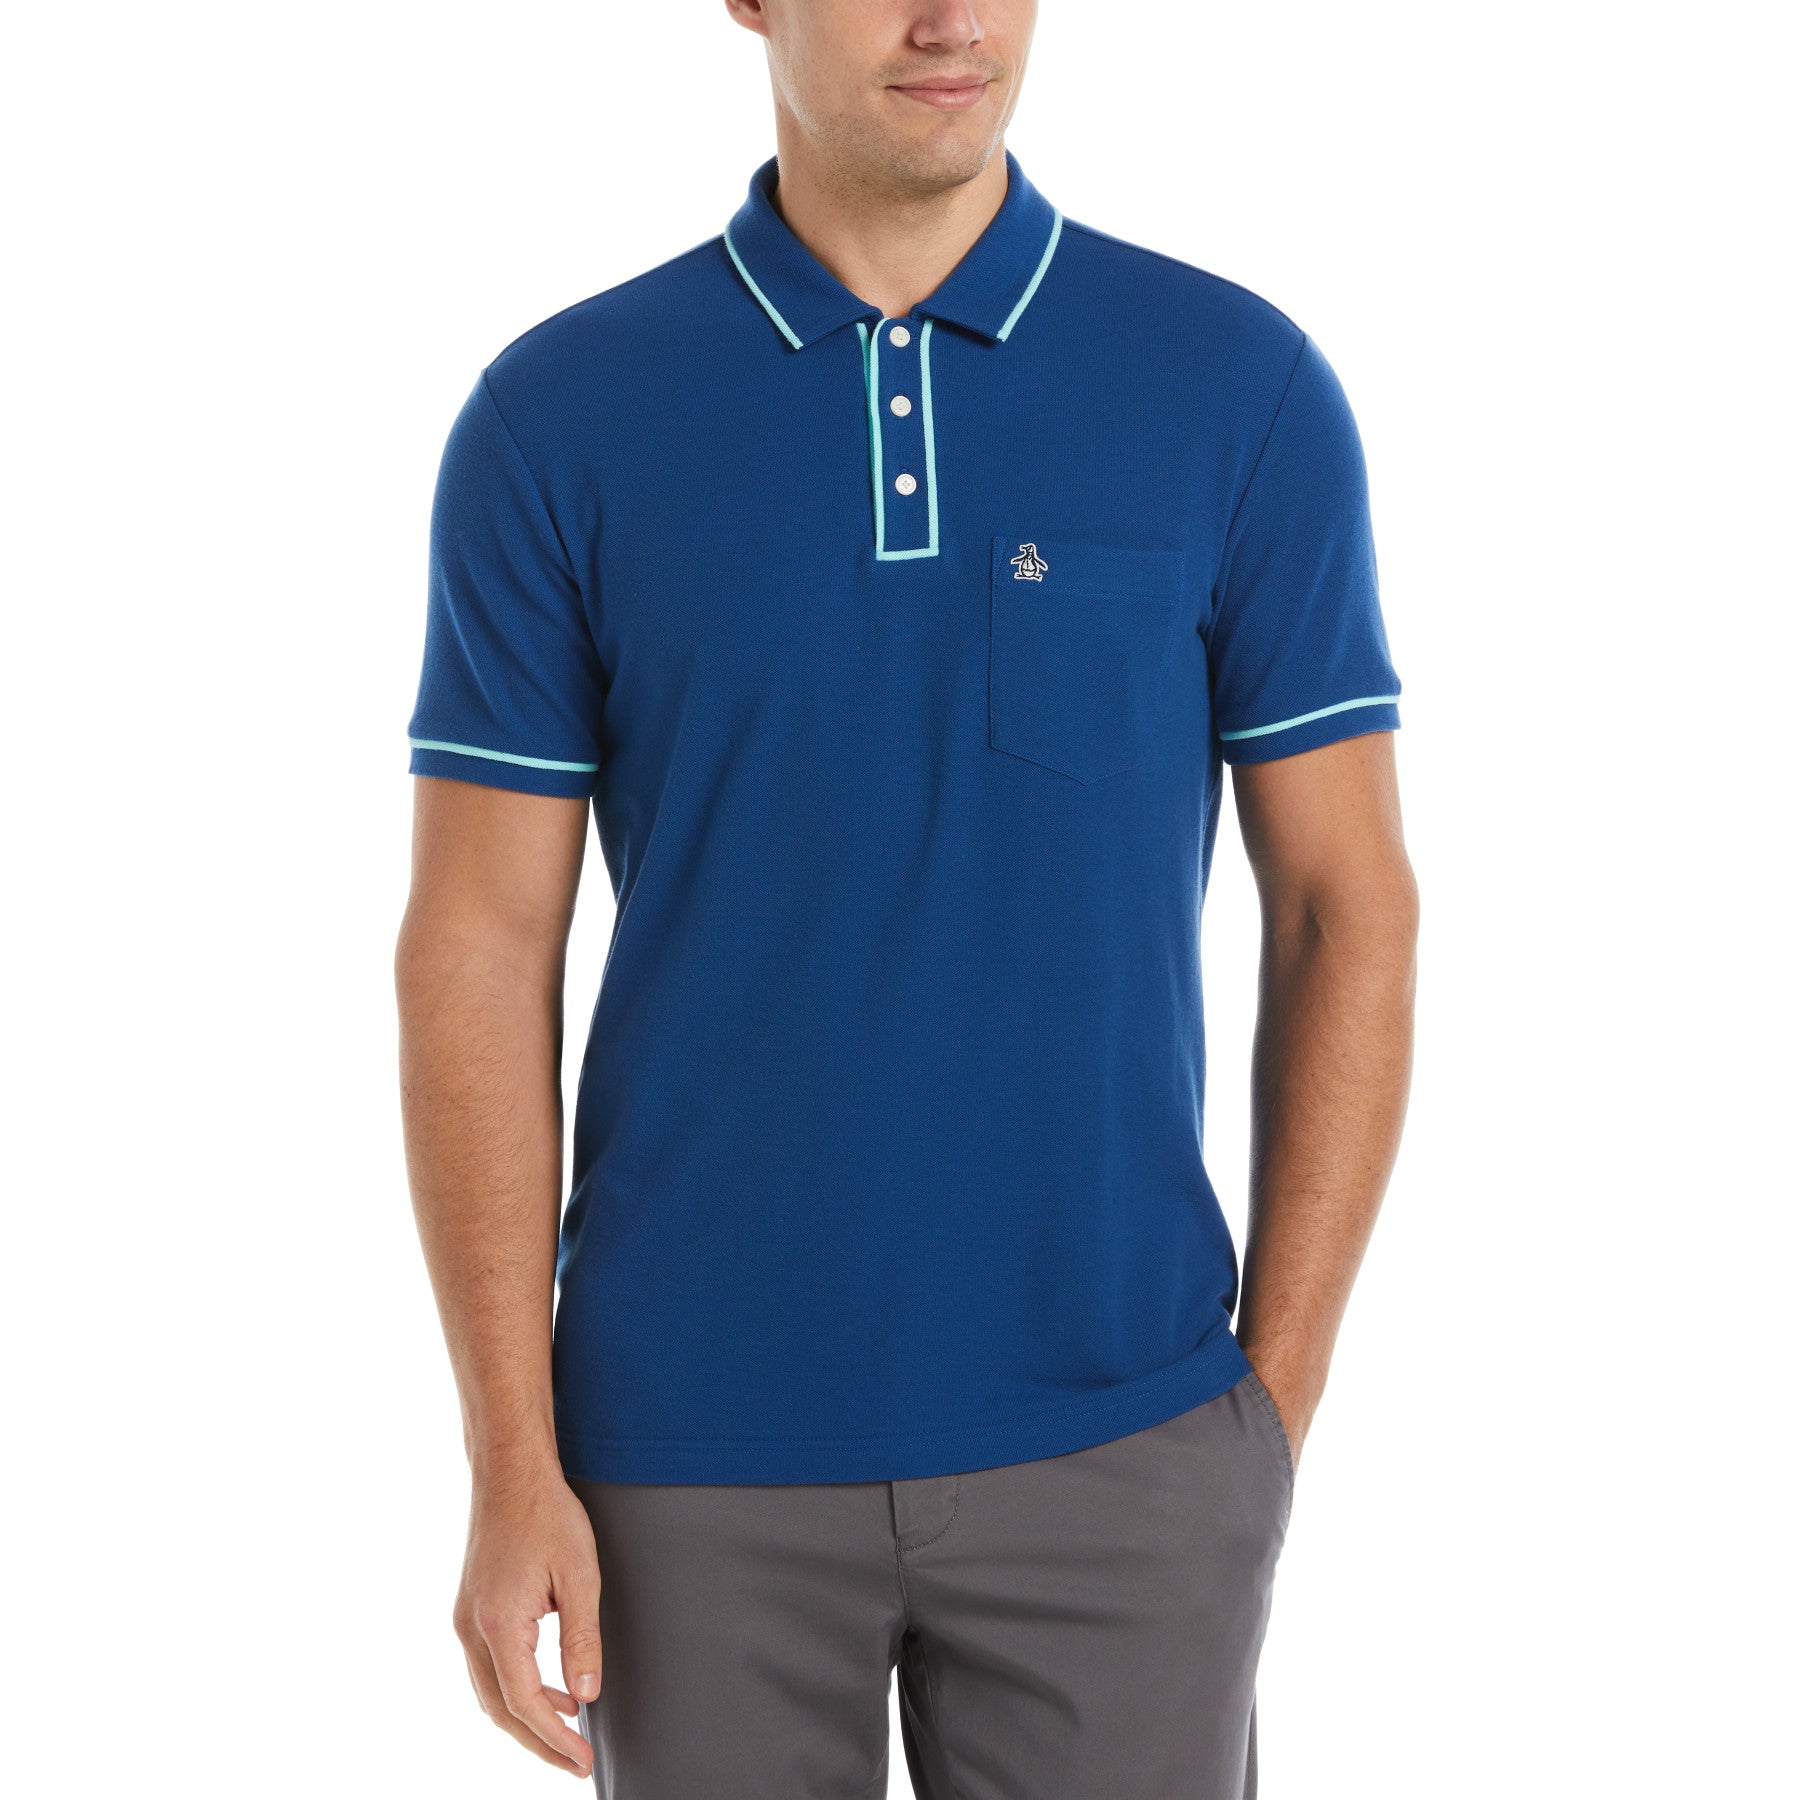 View Earl Organic Cotton Polo Shirt In Limoges information